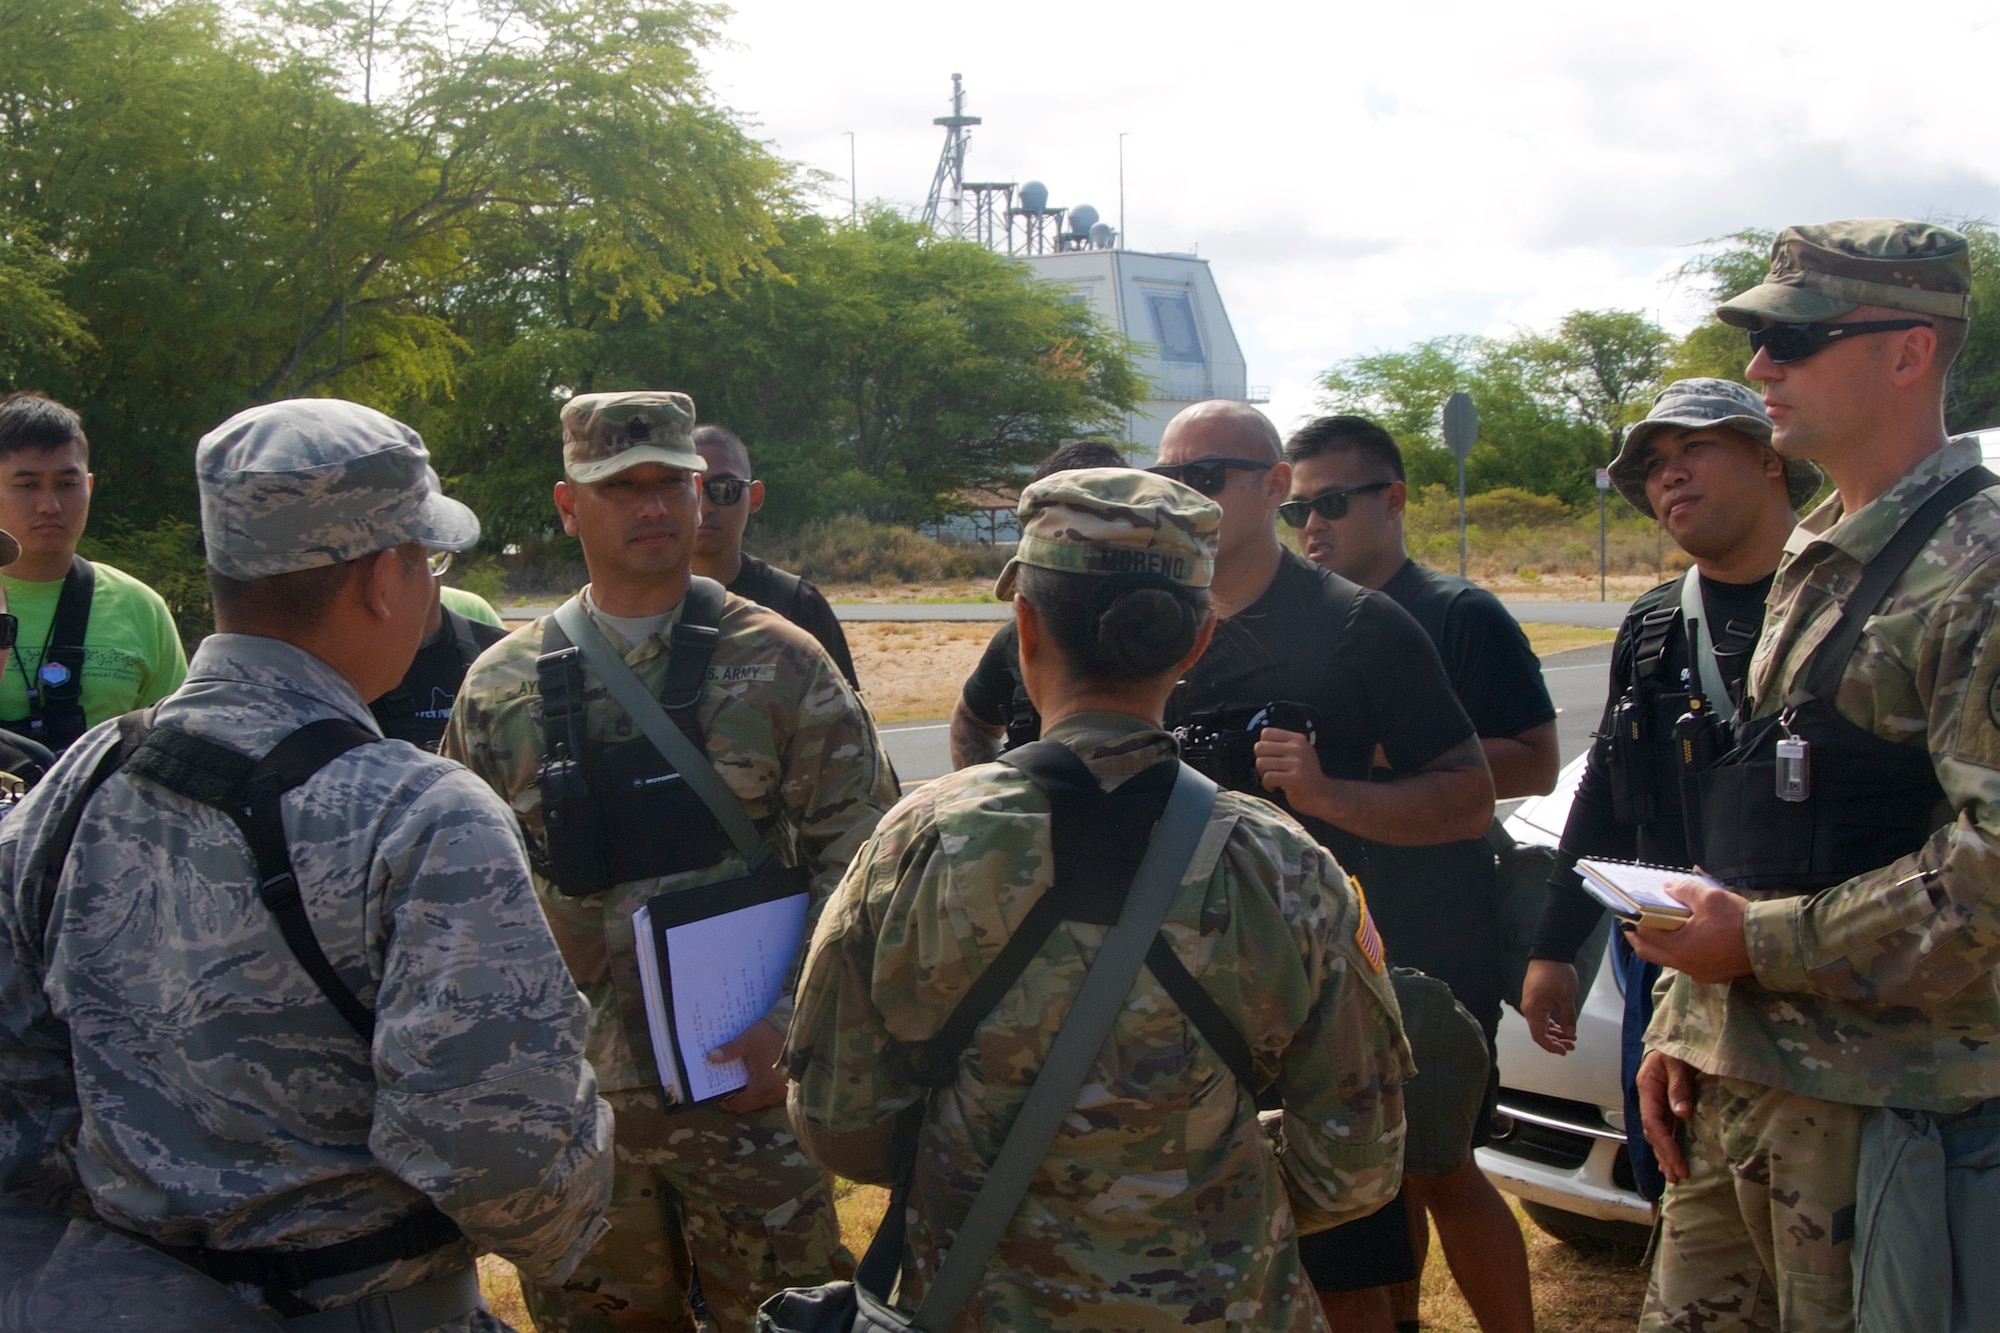 Airmen and soldiers from the Hawaii National Guard's 93rd Civil Support Team gather for a mission brief during Kauai County Exercise 2017